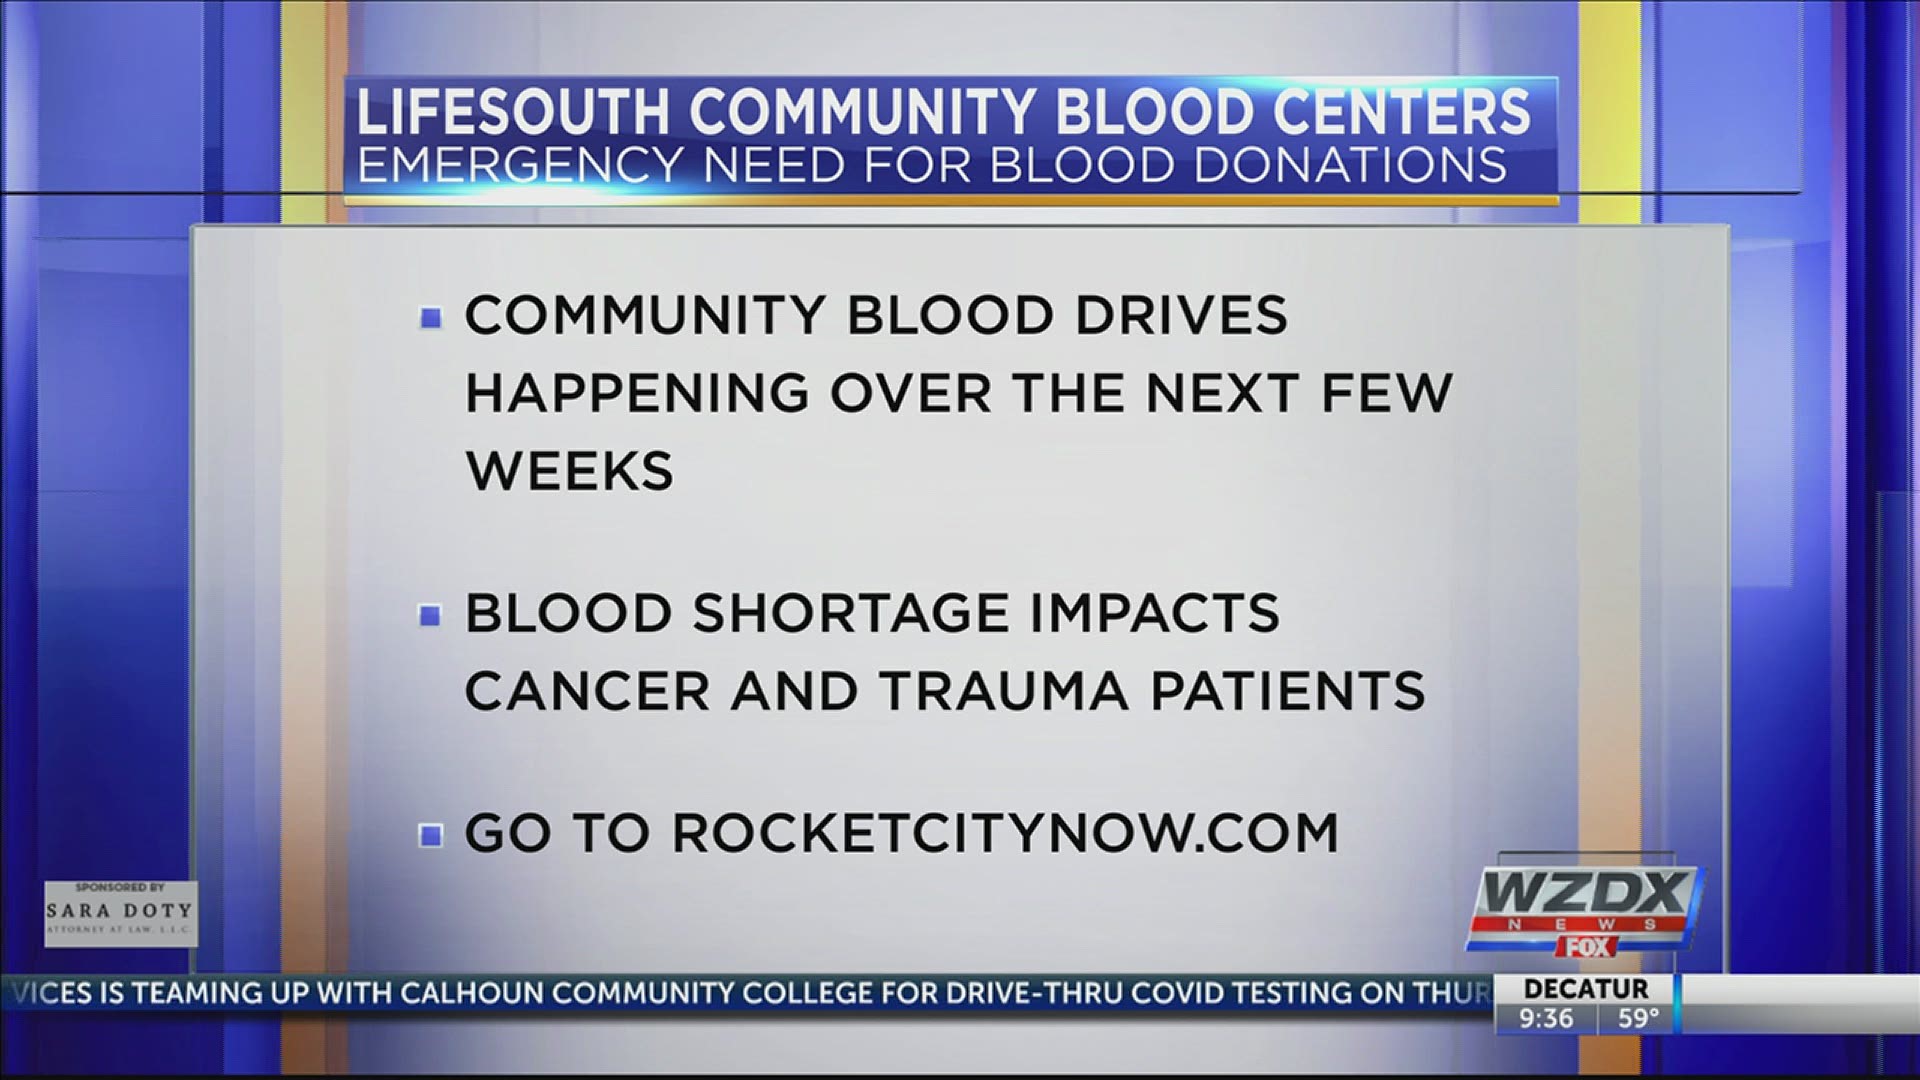 The organization said it is in critical need of blood donors of all types and will be holding several community blood drives throughout the coming weeks.